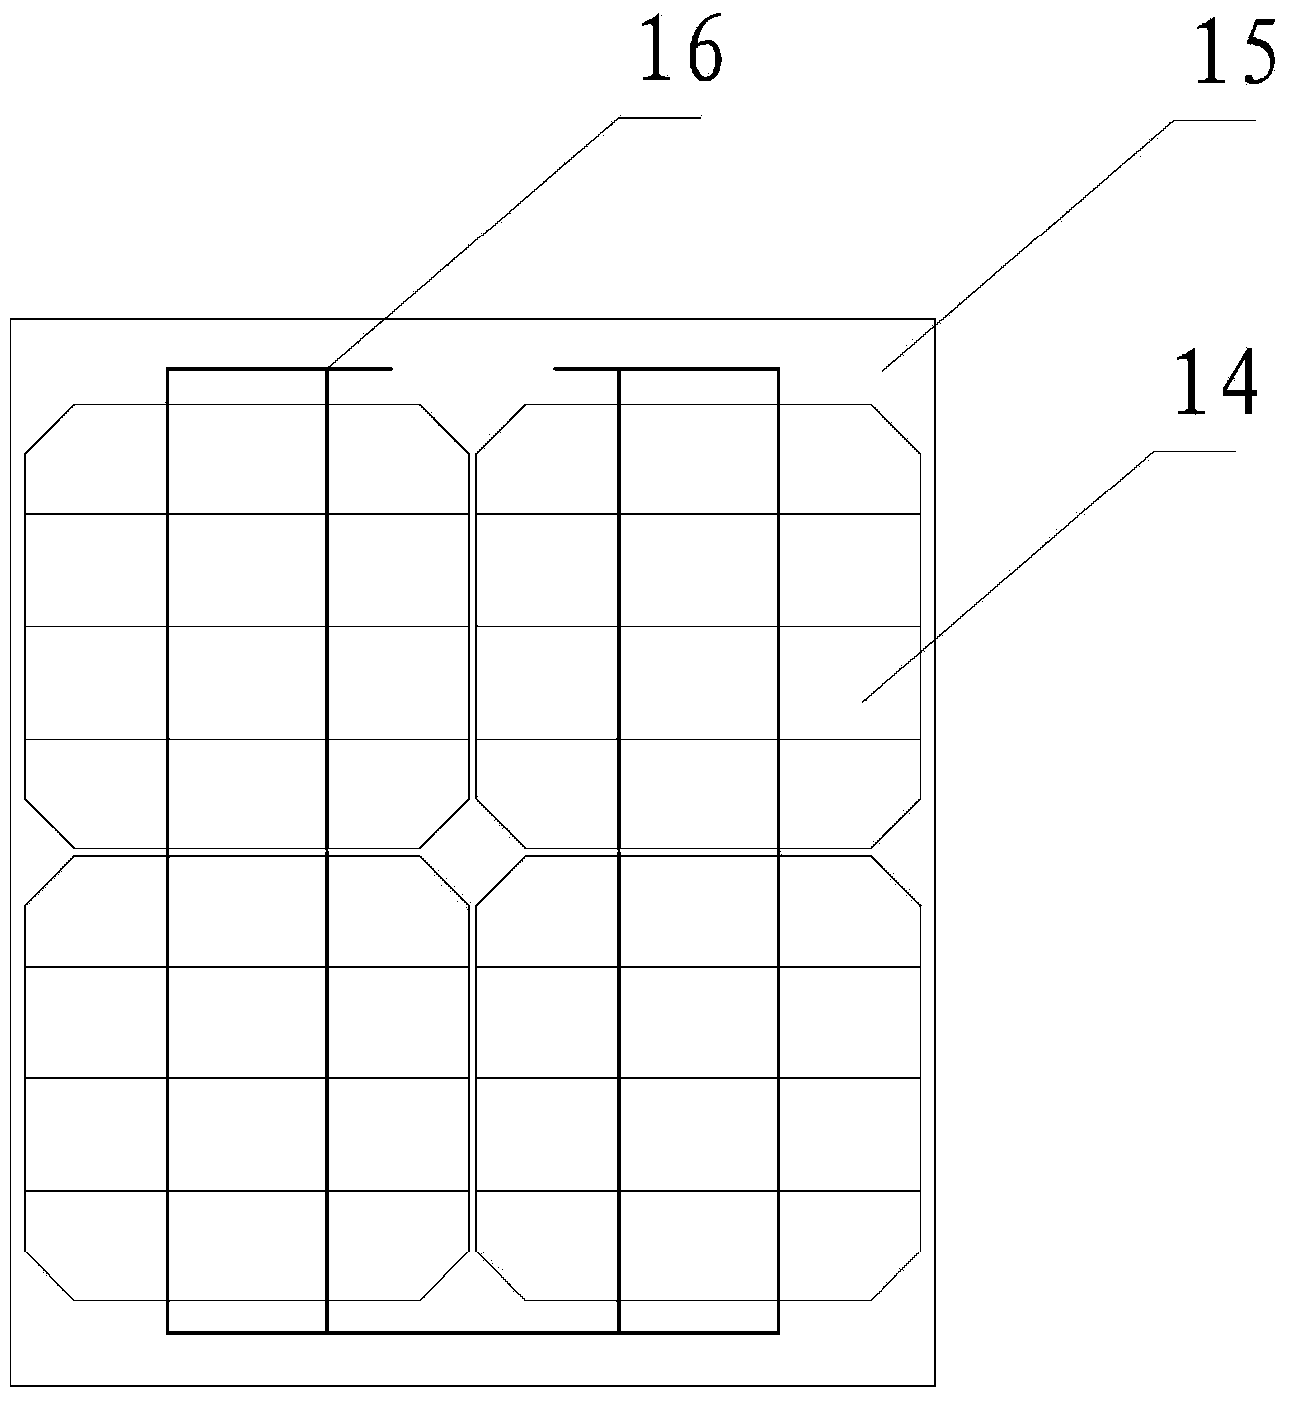 Spliced building component solar photovoltaic tile and battery panel thereof